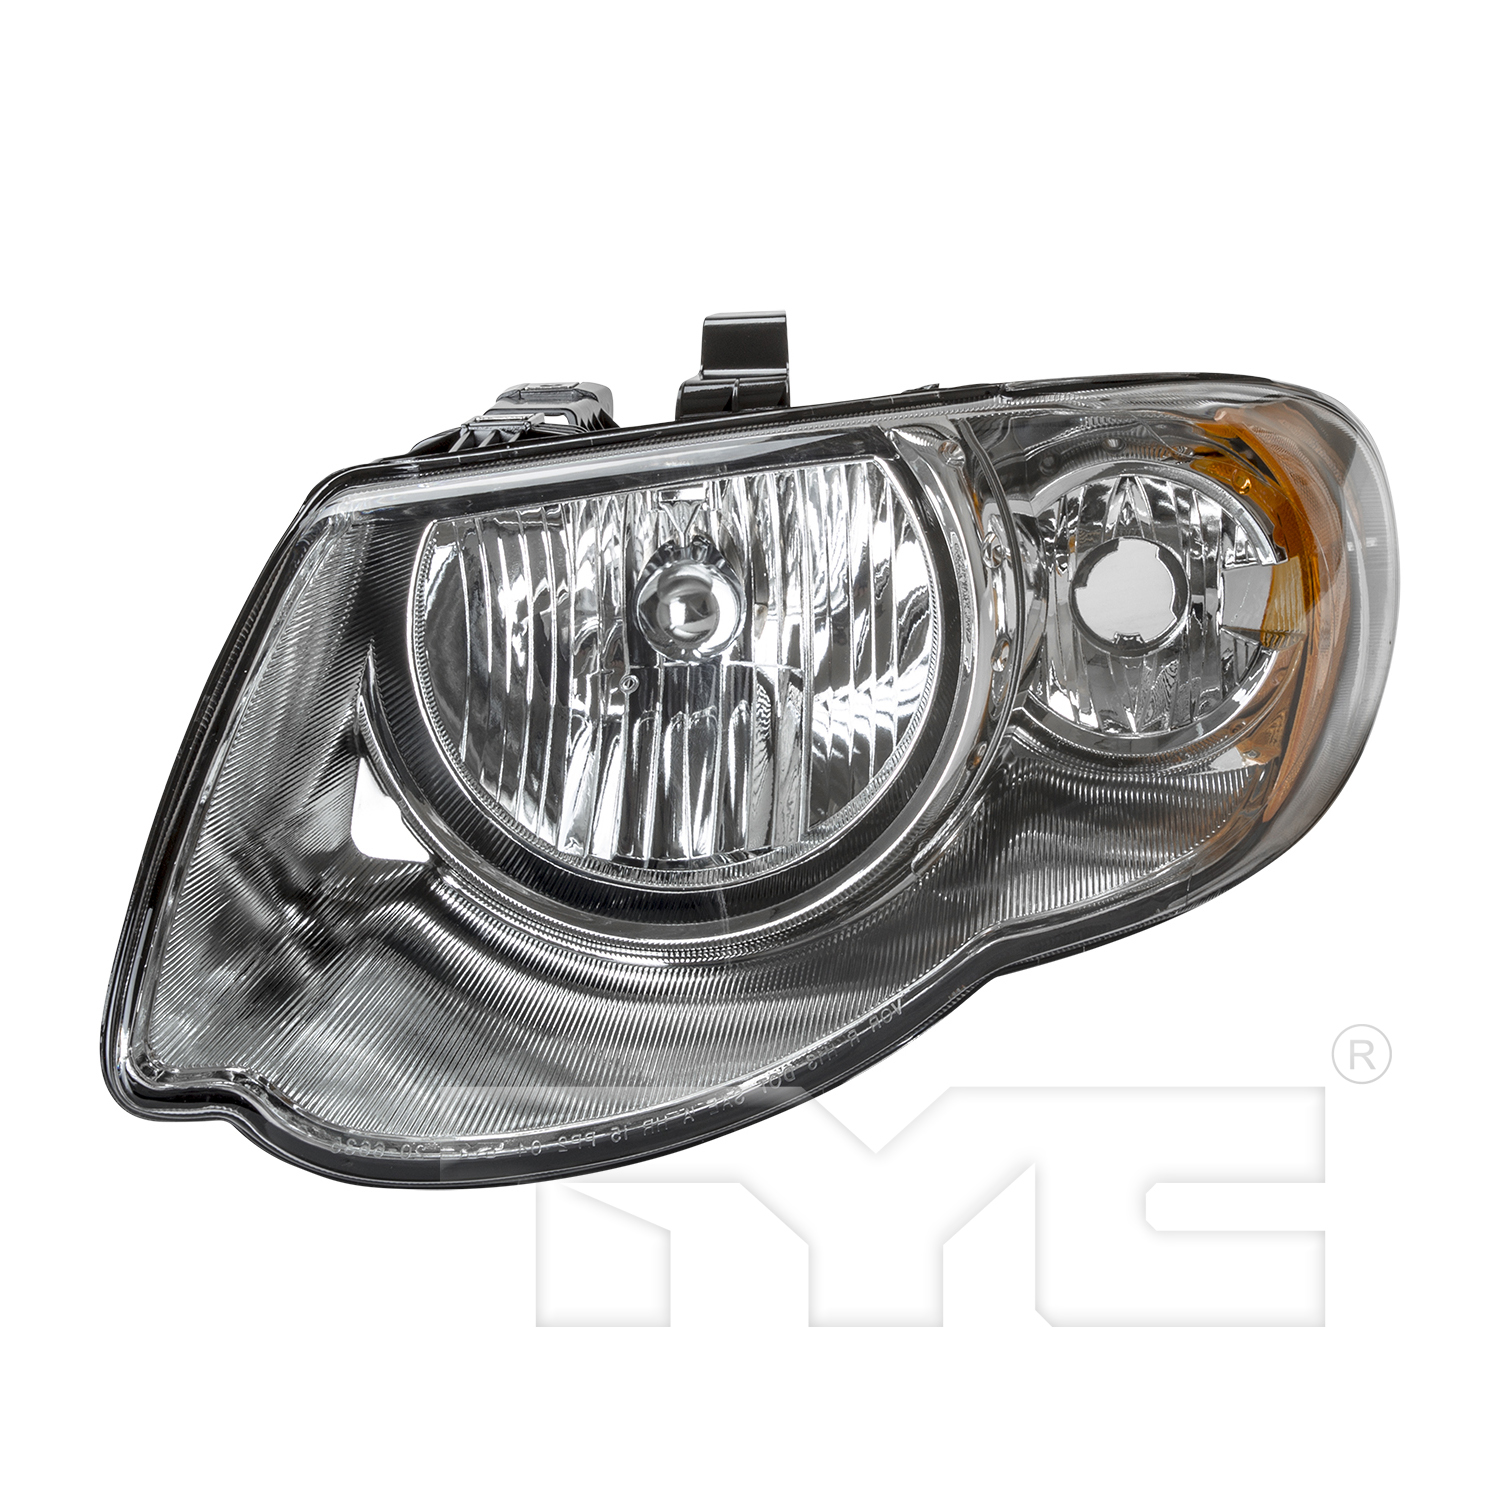 Aftermarket HEADLIGHTS for CHRYSLER - TOWN & COUNTRY, TOWN & COUNTRY,05-07,LT Headlamp assy composite